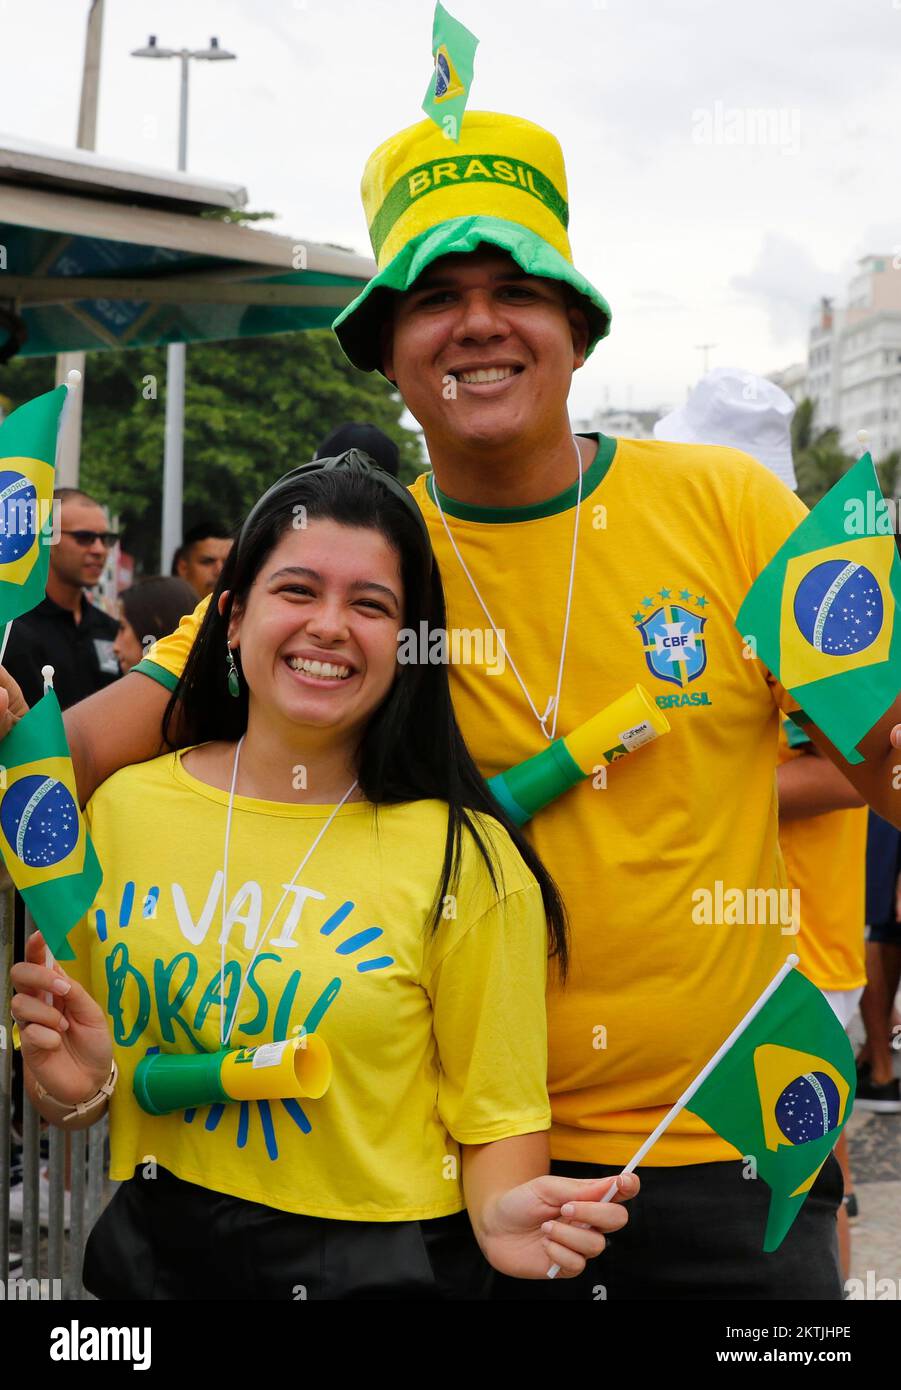 Brazilian fans gather at street party to support national soccer team playing Fifa World Cup at Fan Festival arena Stock Photo